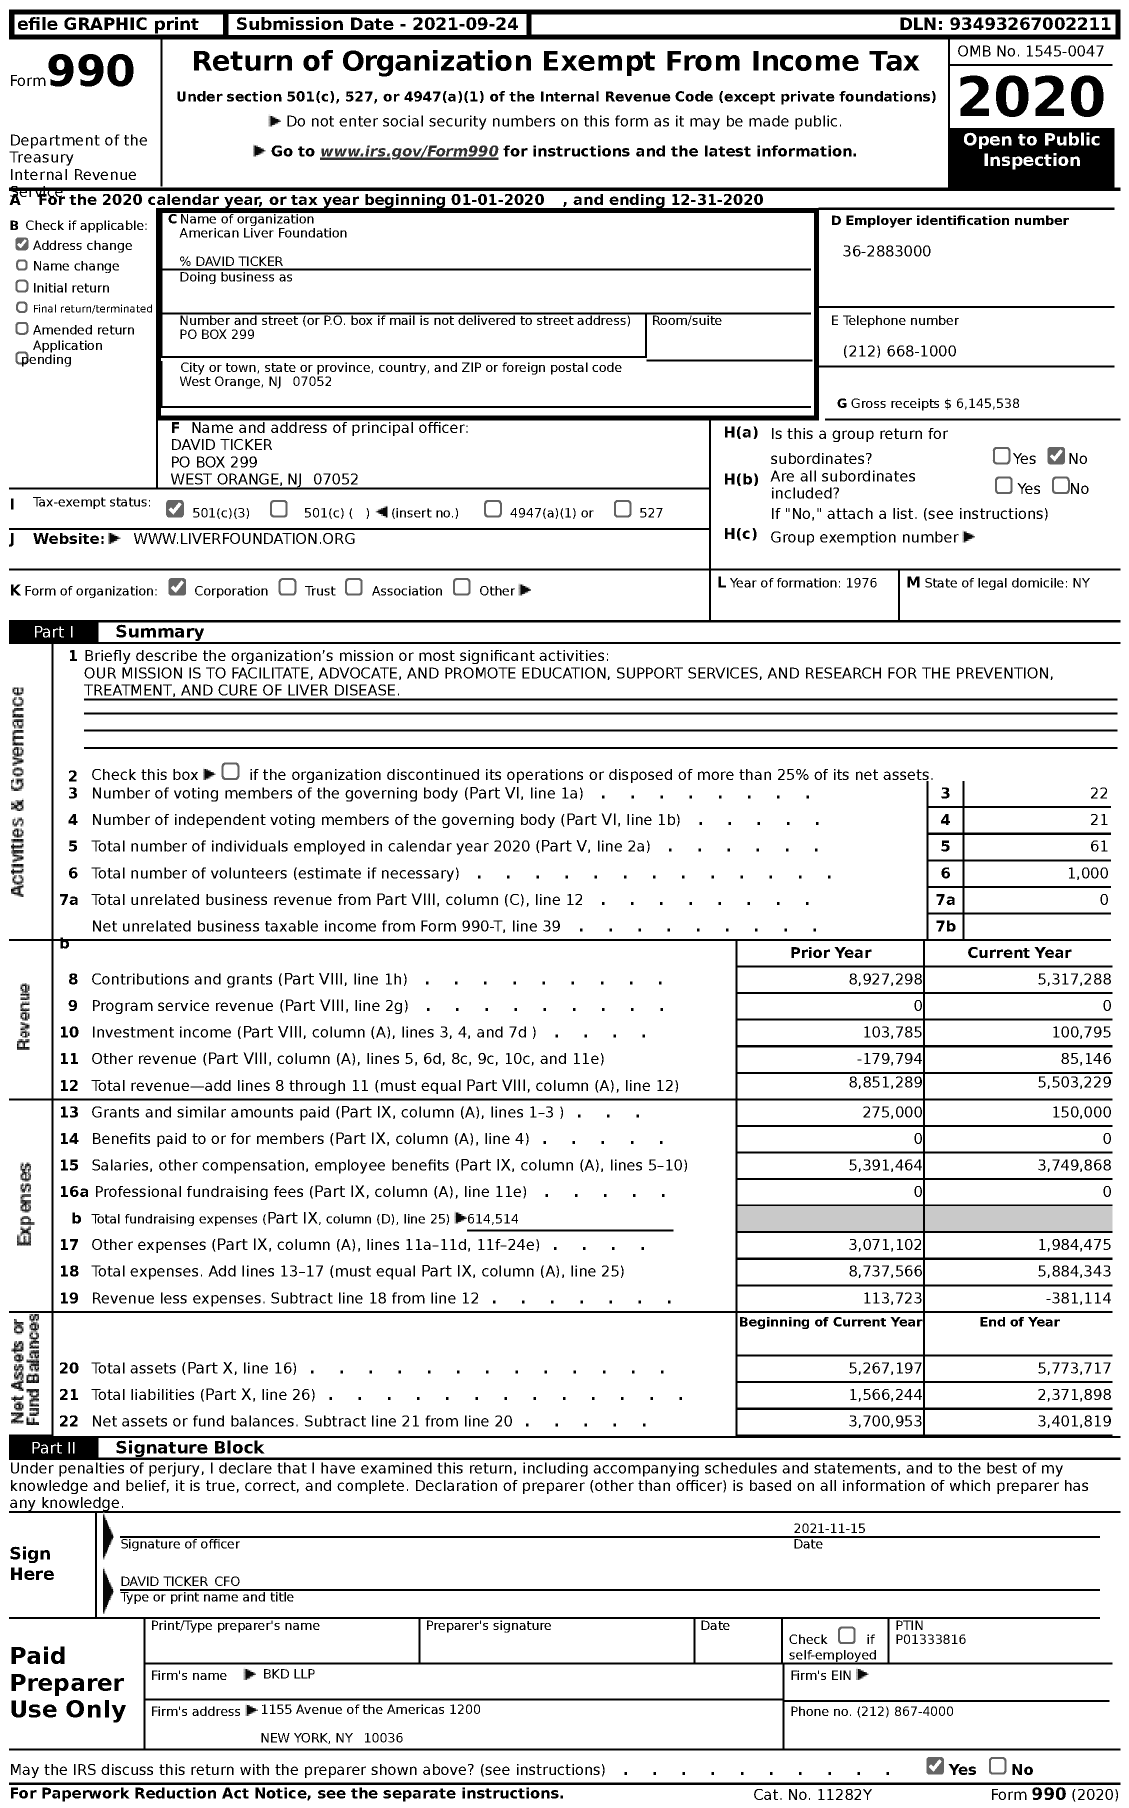 Image of first page of 2020 Form 990 for American Liver Foundation (ALF)